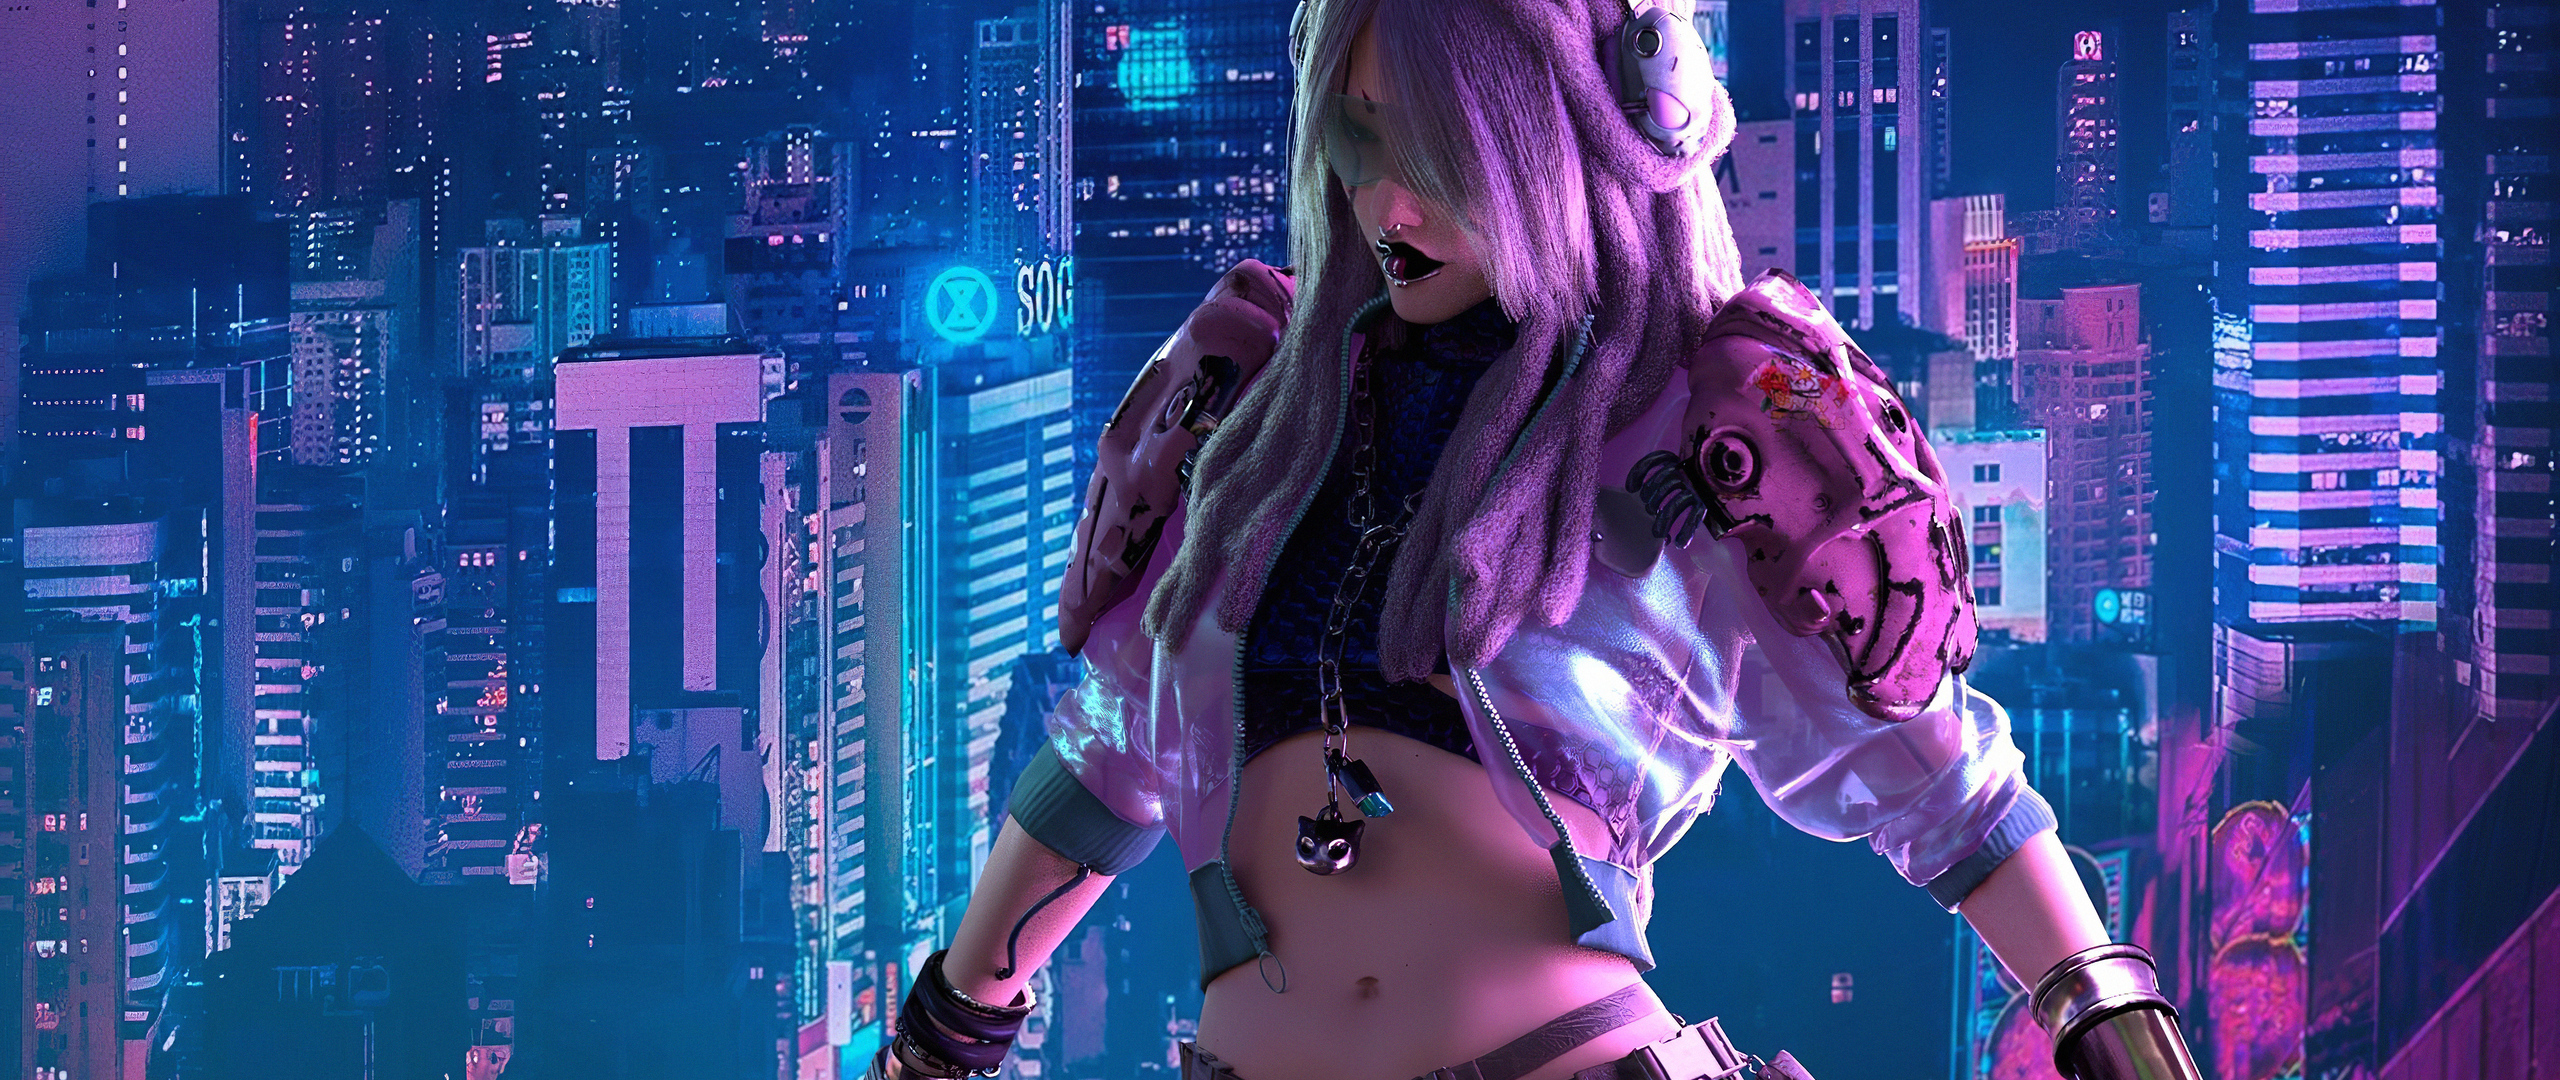 2560x1080 Cyberpunk Lamborghini Girl Alongside Wallpaper,2560x1080  Resolution HD 4k Wallpapers,Images,Backgrounds,Photos and Pictures